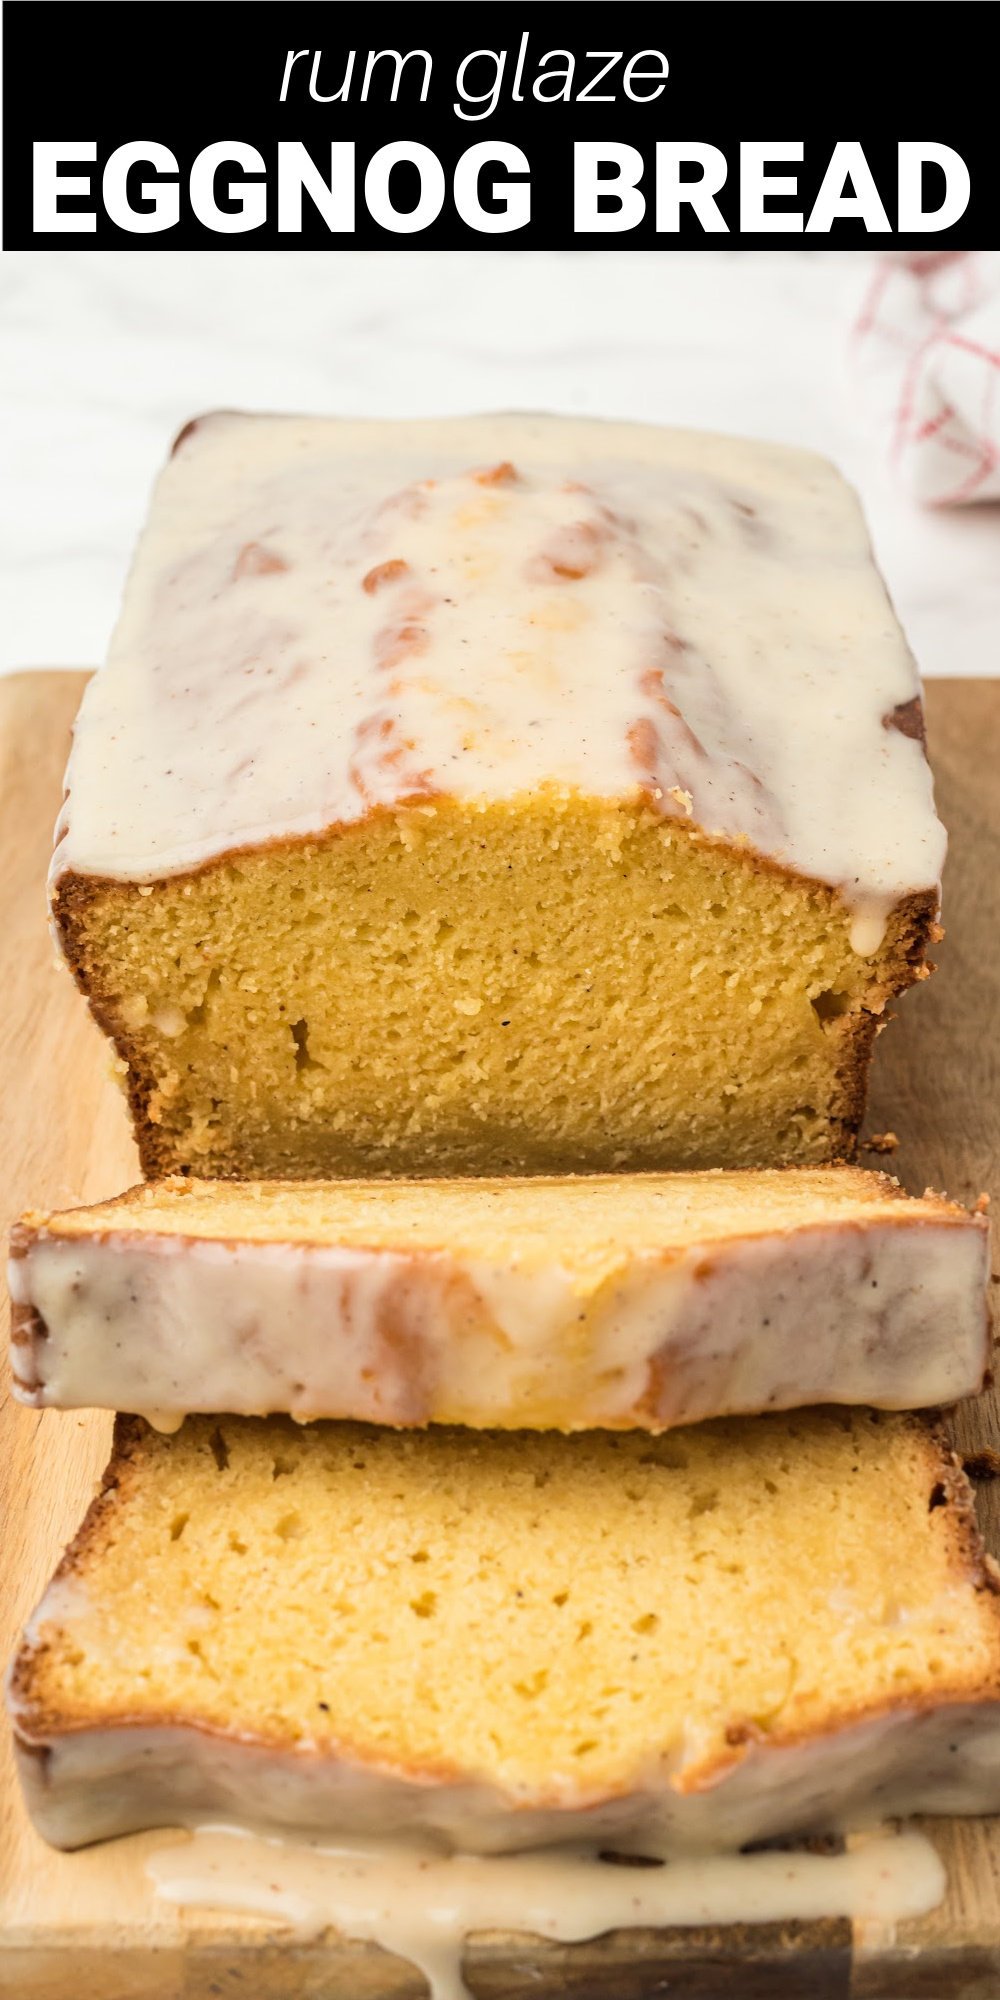 Eggnog is a must during the Christmas season. This recipe takes all those same decadent eggnog flavors and turns them into a moist and delicious eggnog bread with a sweet eggnog glaze. It's truly one of the best holiday recipes you'll make this year.